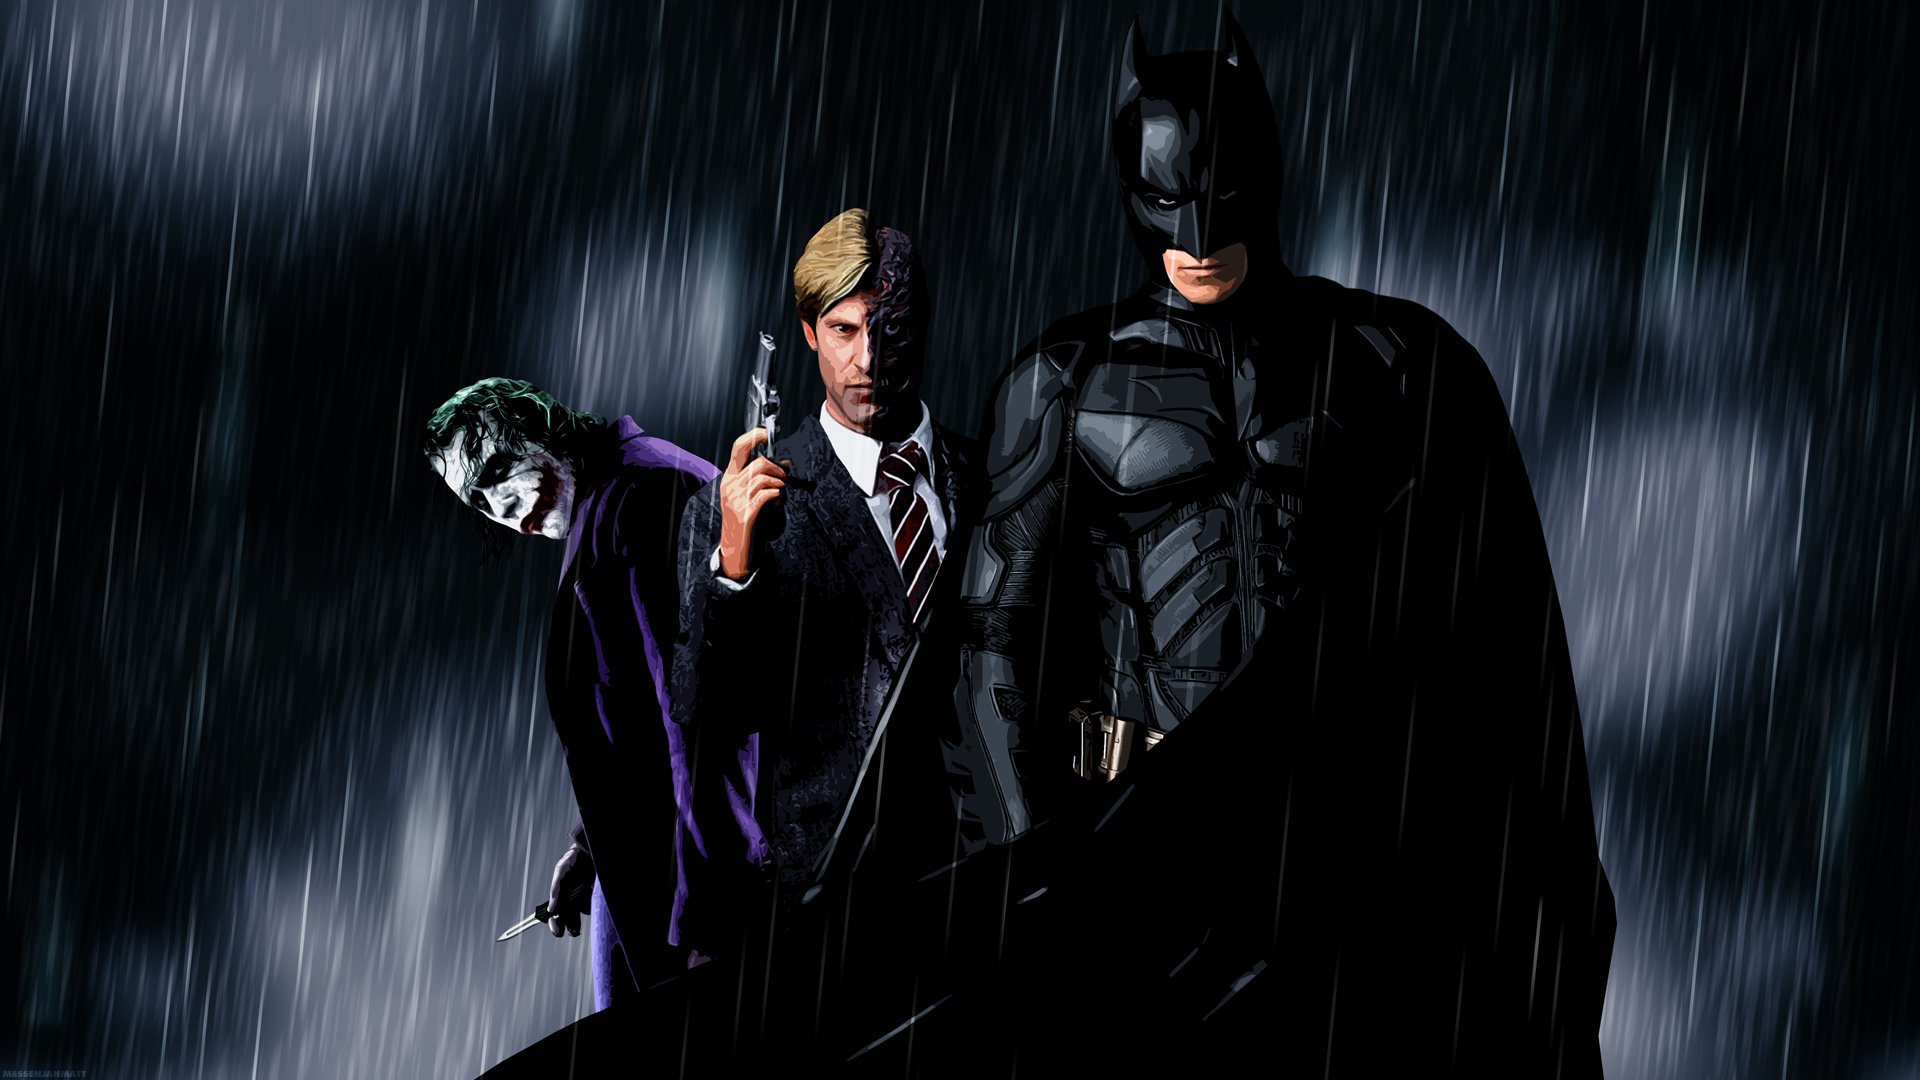 The Dark Knight Image HD Wallpaper And